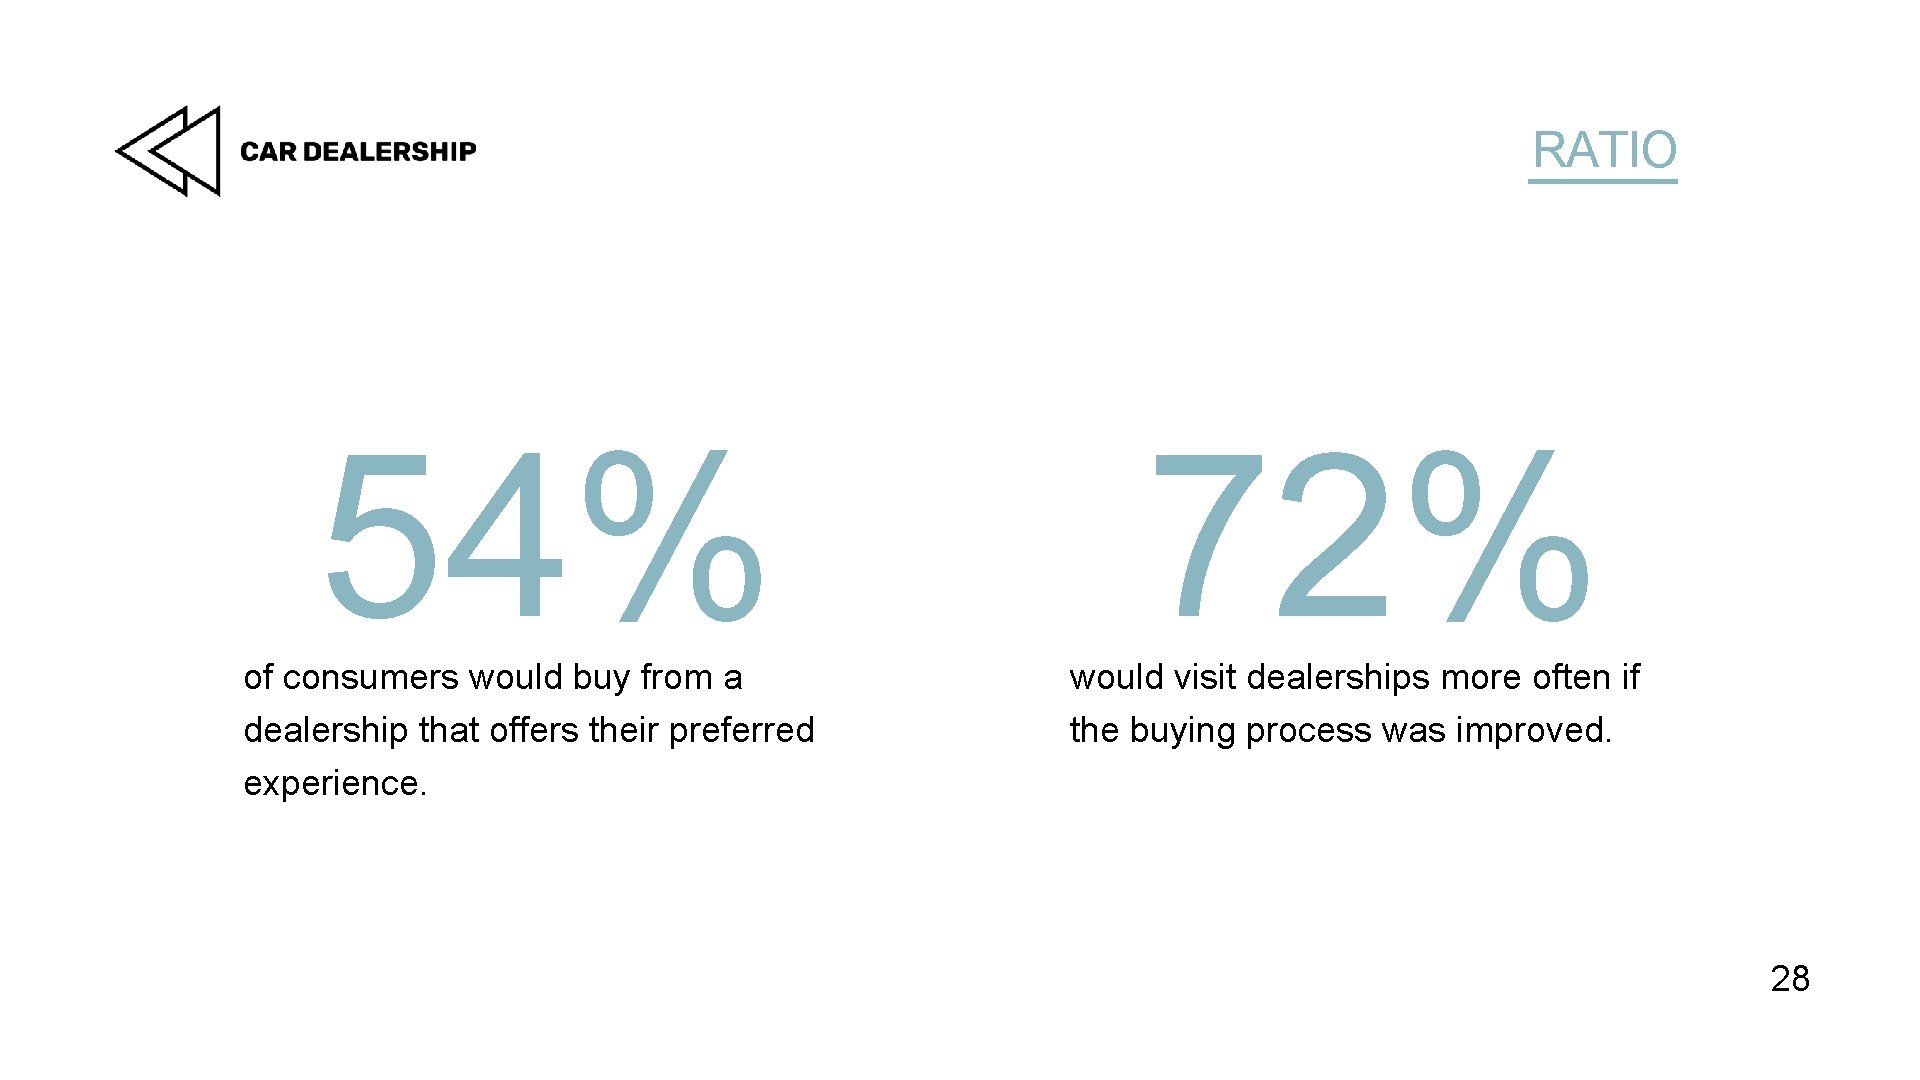 RATIO 54% of consumers would buy from a dealership that offers their preferred experience.